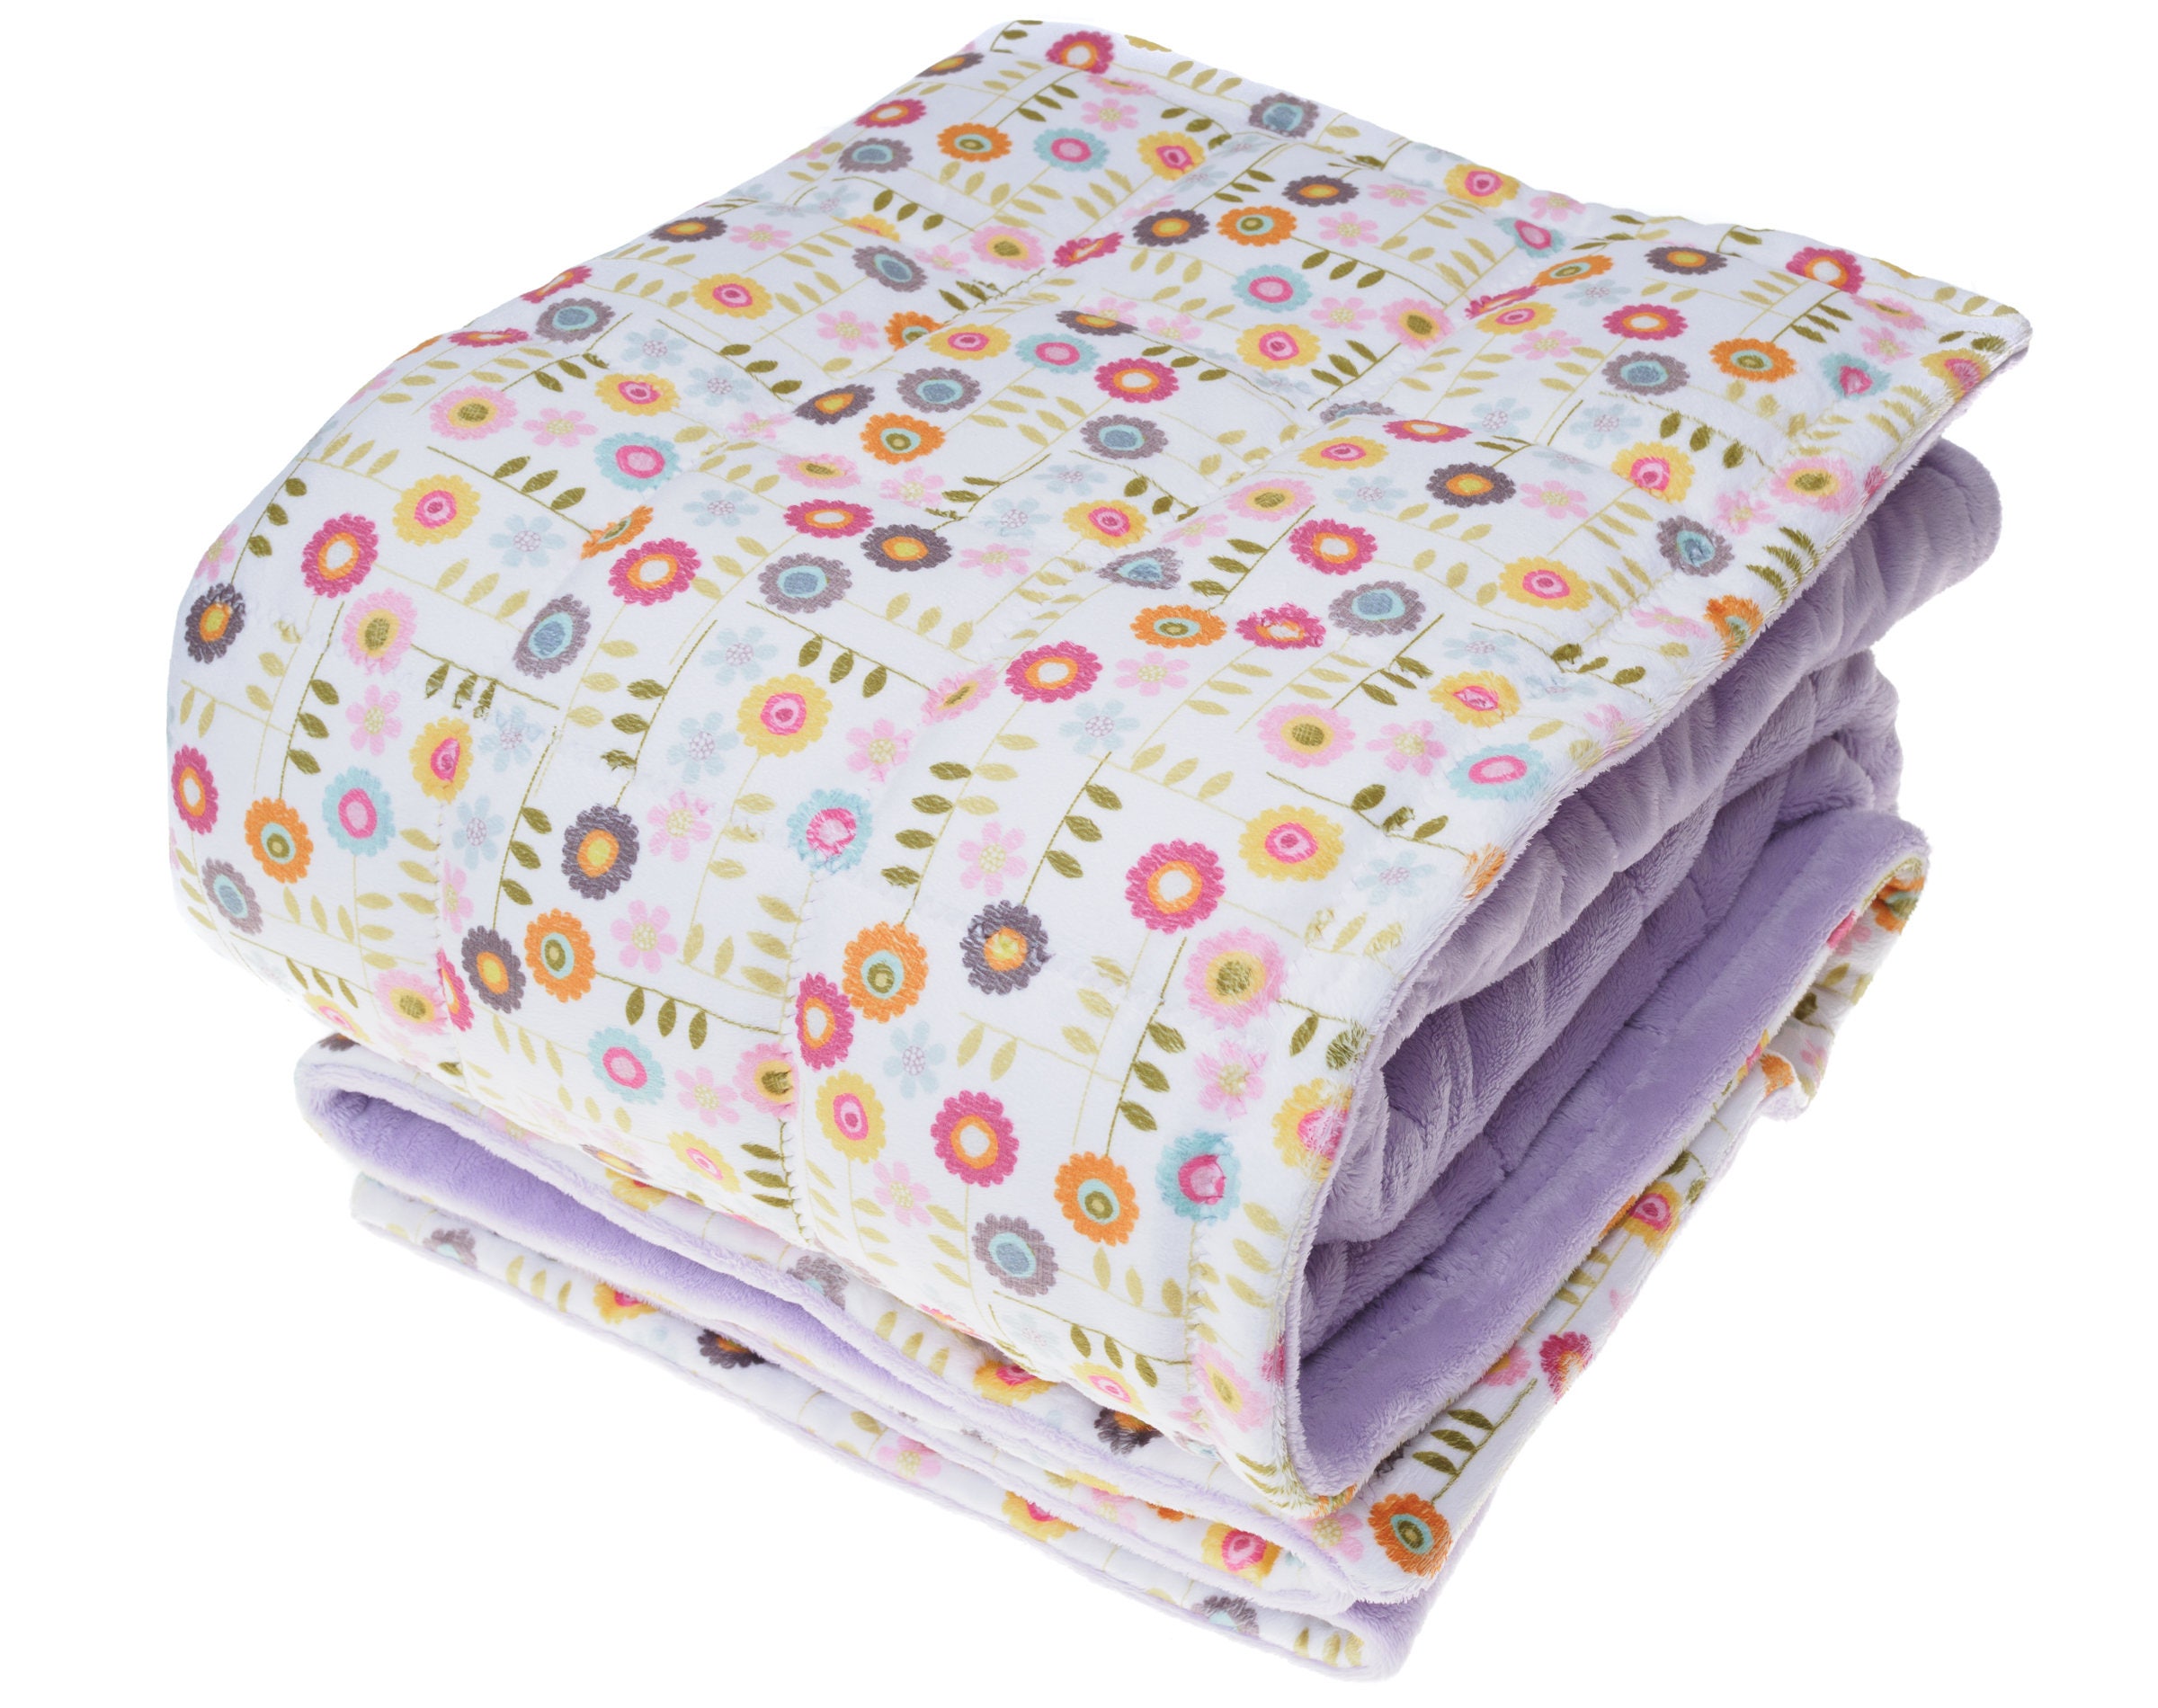 Double minky weighted blanket 4x4 small pocket